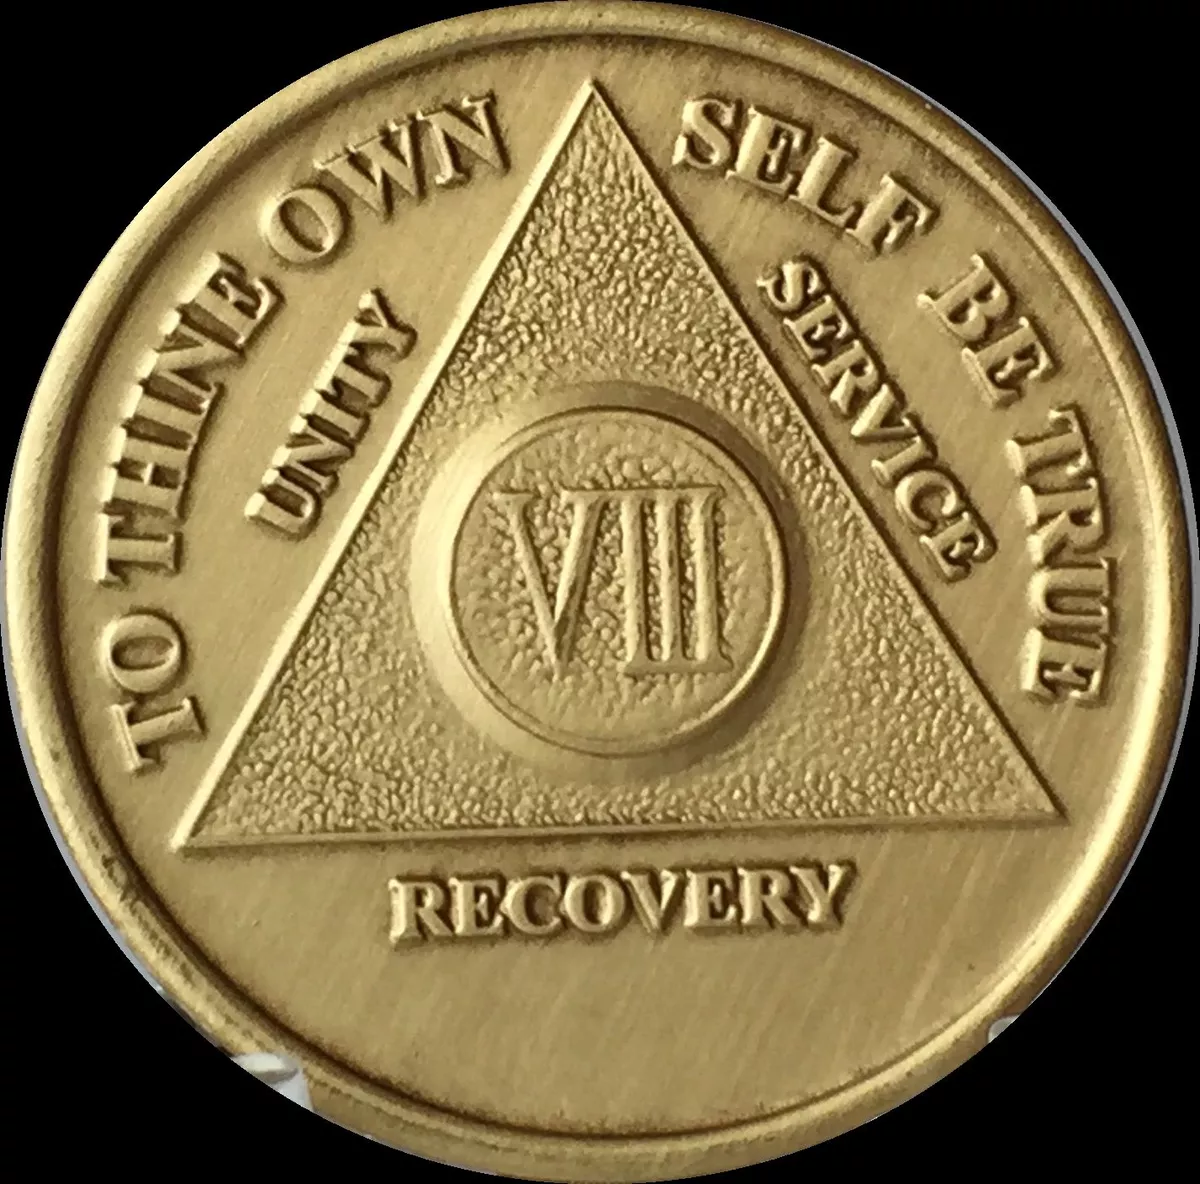 8 Year AA Medallion Fine Silver Sobriety Chip – RecoveryChip